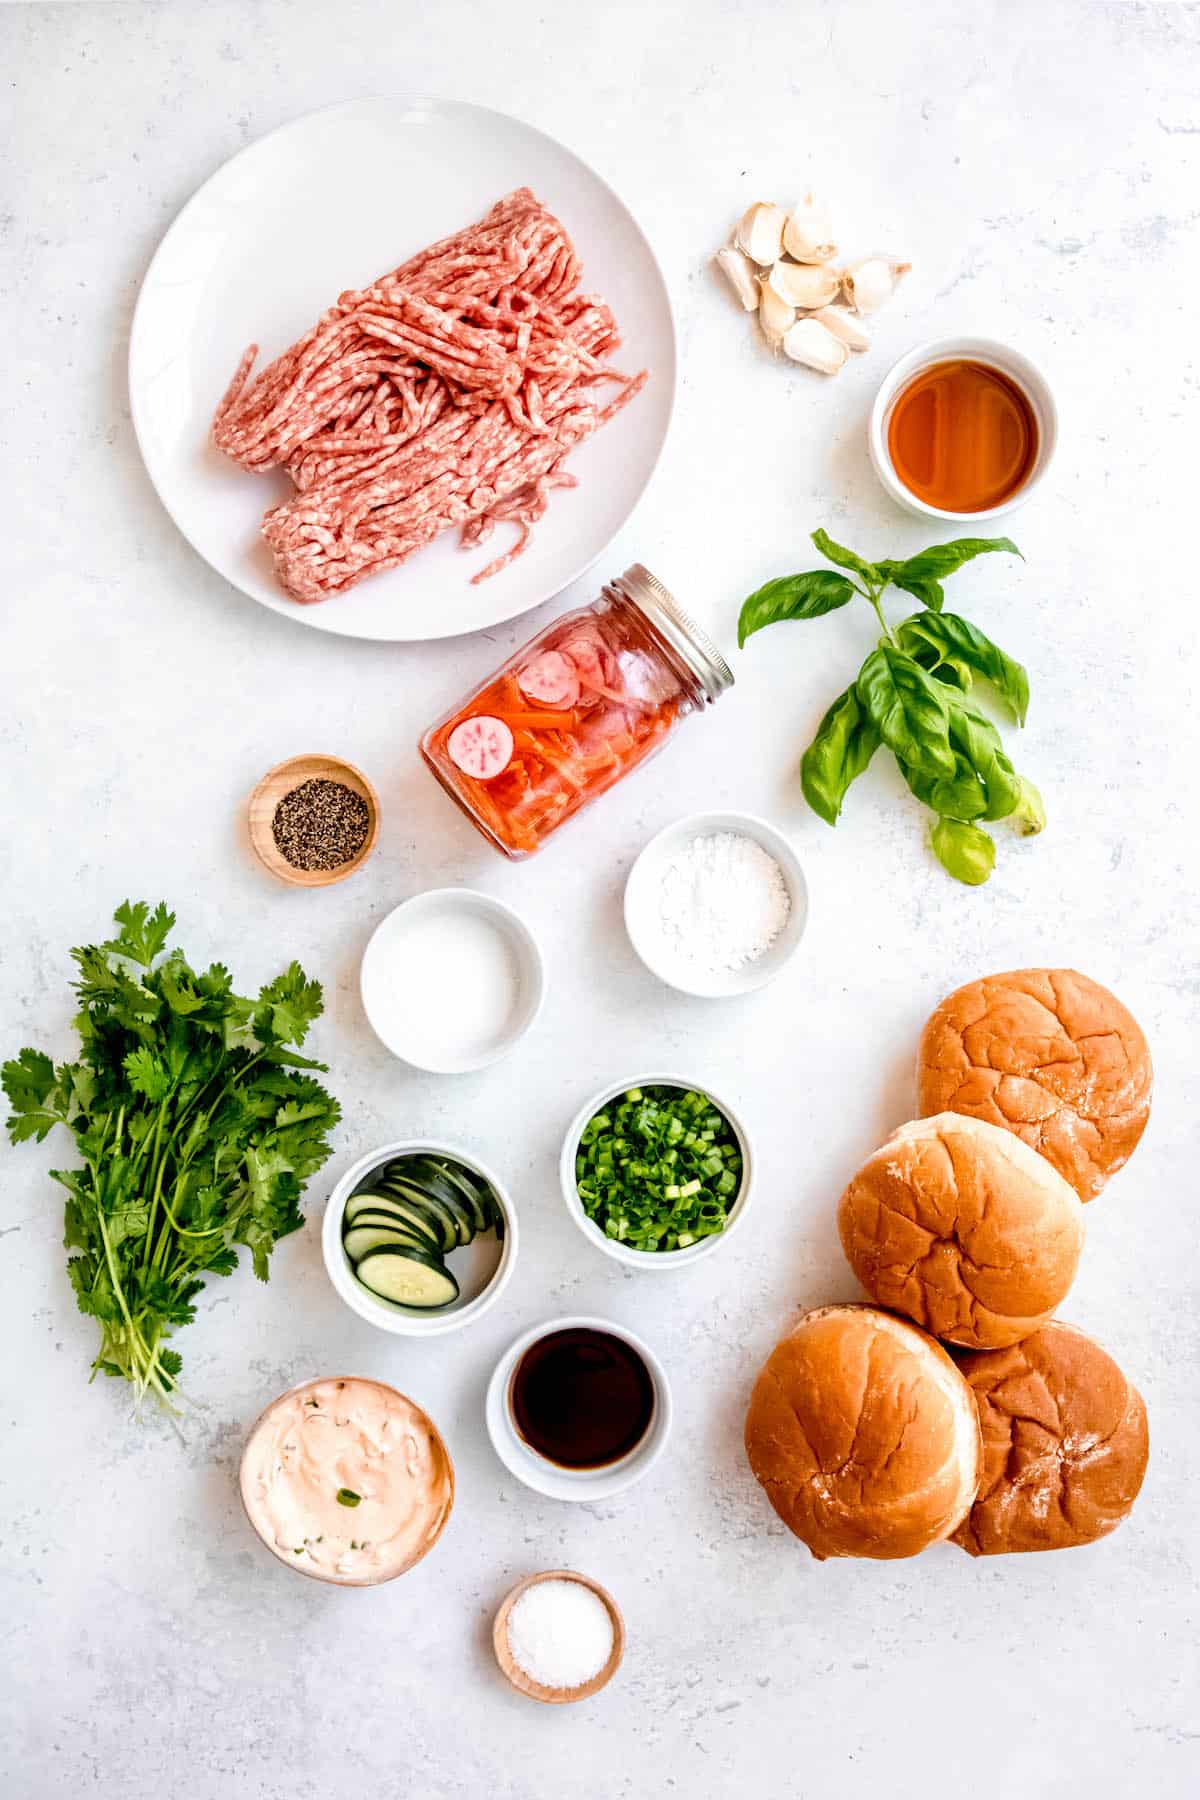 ingredients for making grilled Asian-style ground pork burgers measured out on a white table.